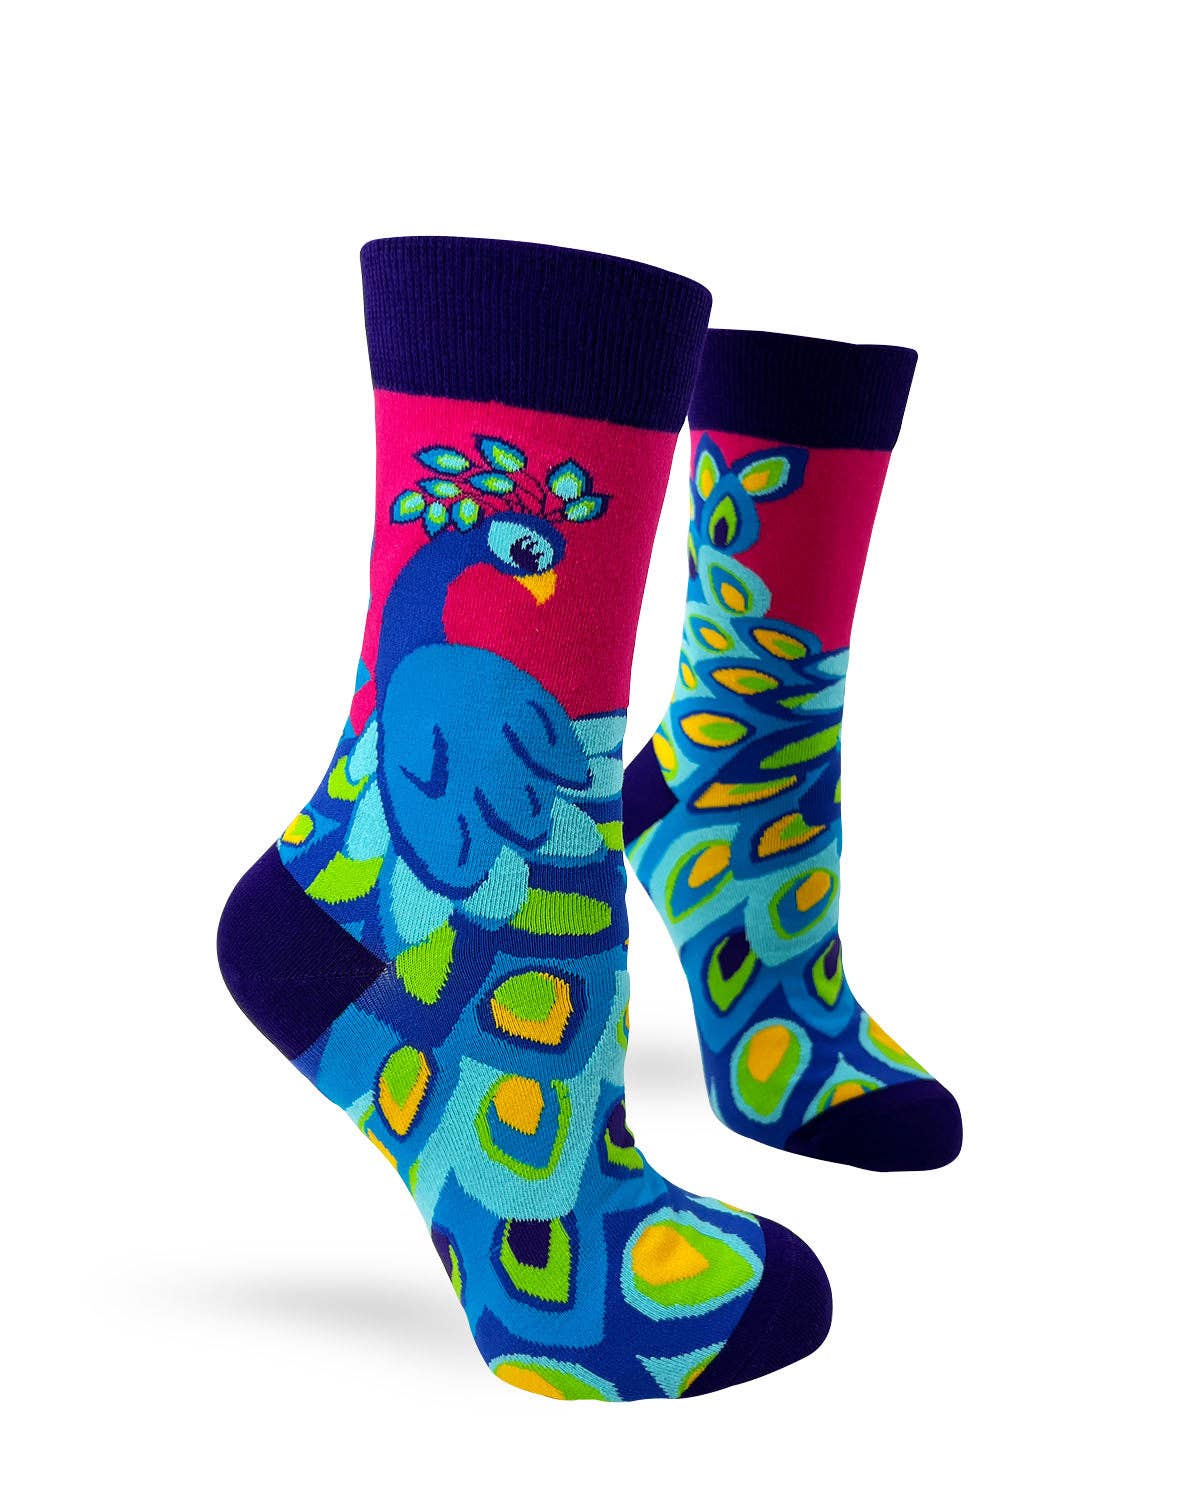 Ladies' Novelty Crew Socks Featuring a Colorful Peacock